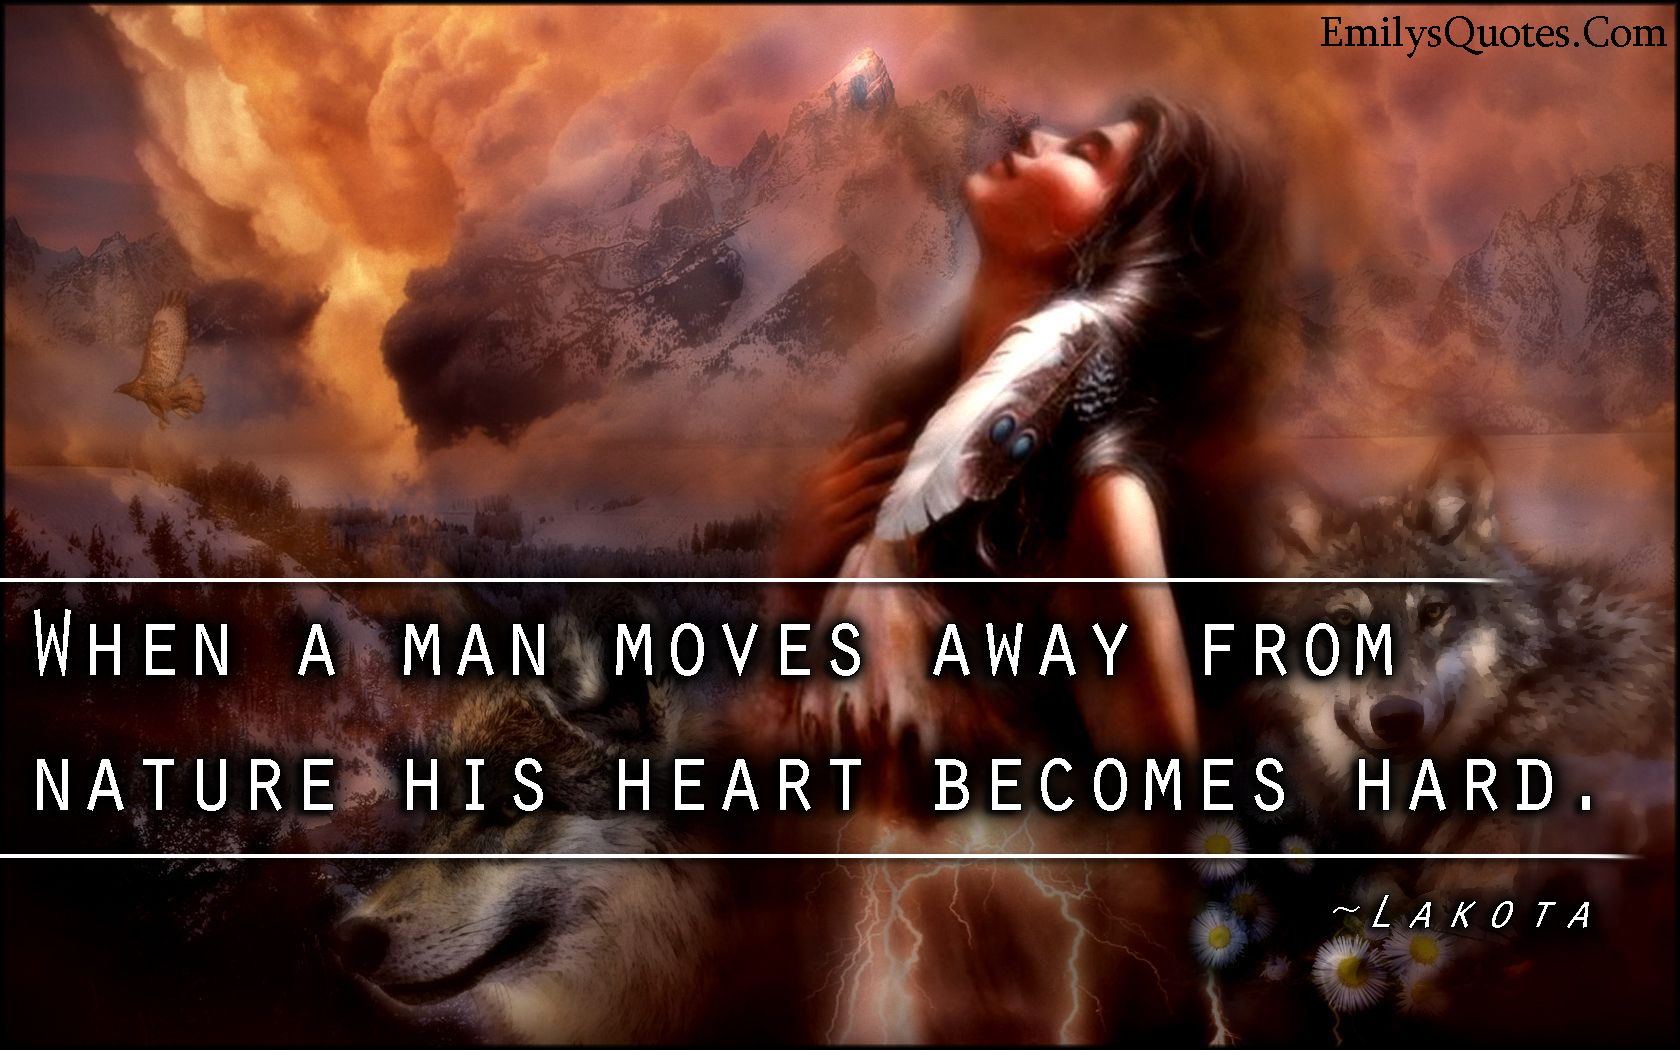 When a man moves away from nature his heart becomes hard